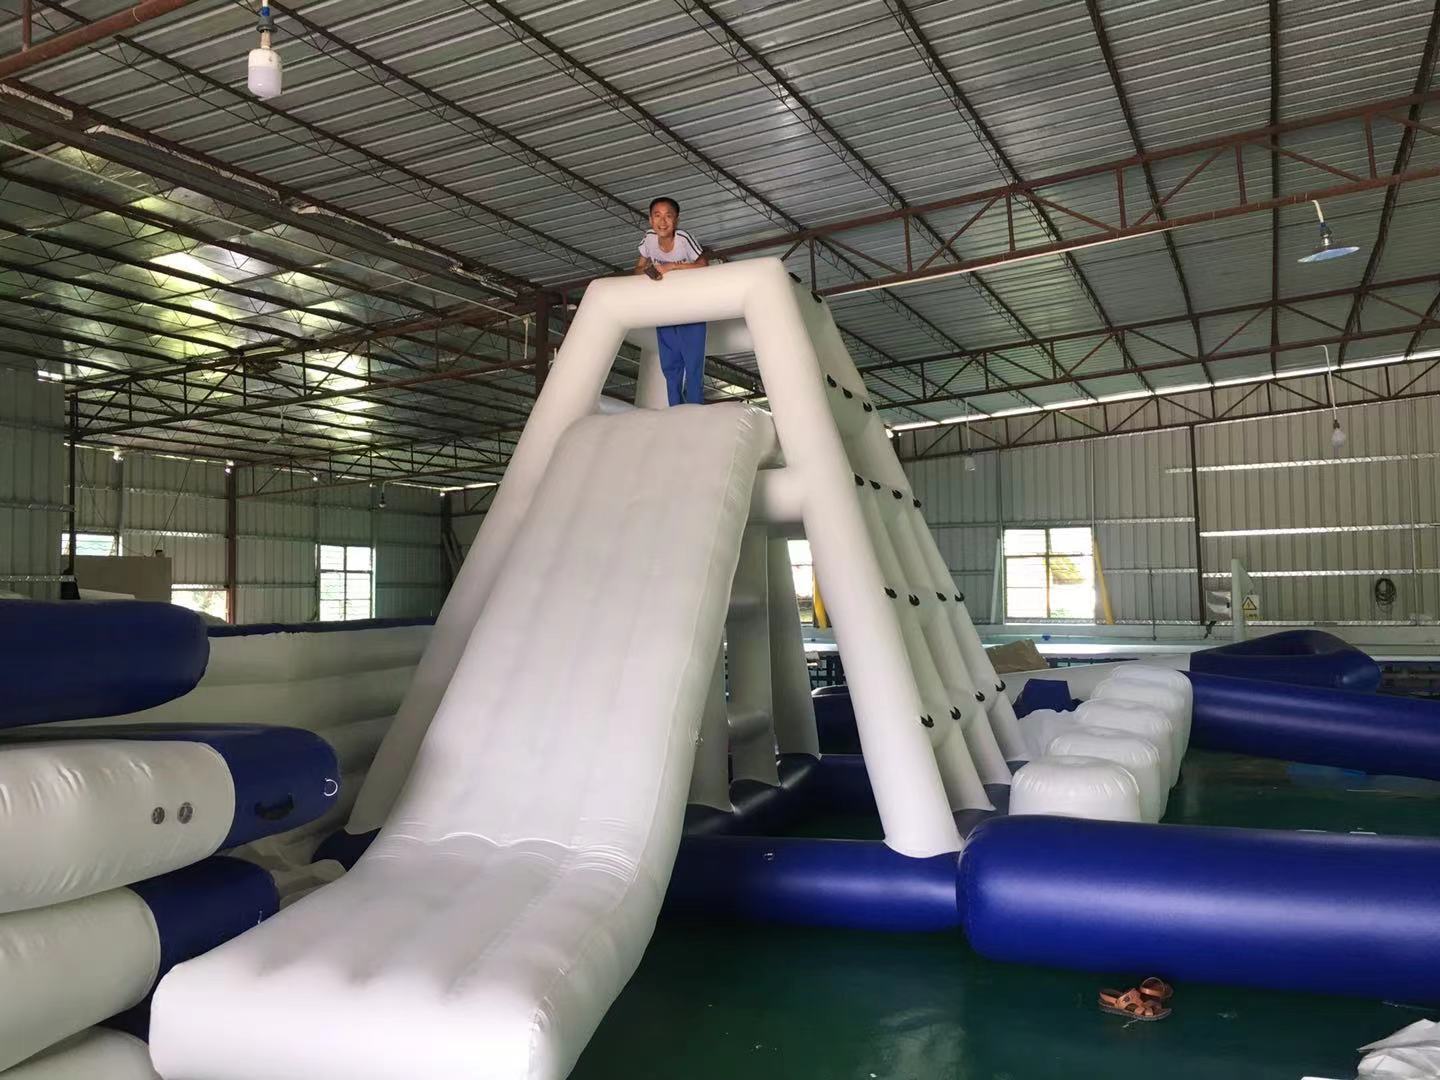 Jungle Joe High cost performance Inflatable Water Climbing games with slide For Water Aqua Park Inflatables water park inflatable aquatic jungle joe water climbing structure and slide jungle joe,jungle joe water climbing